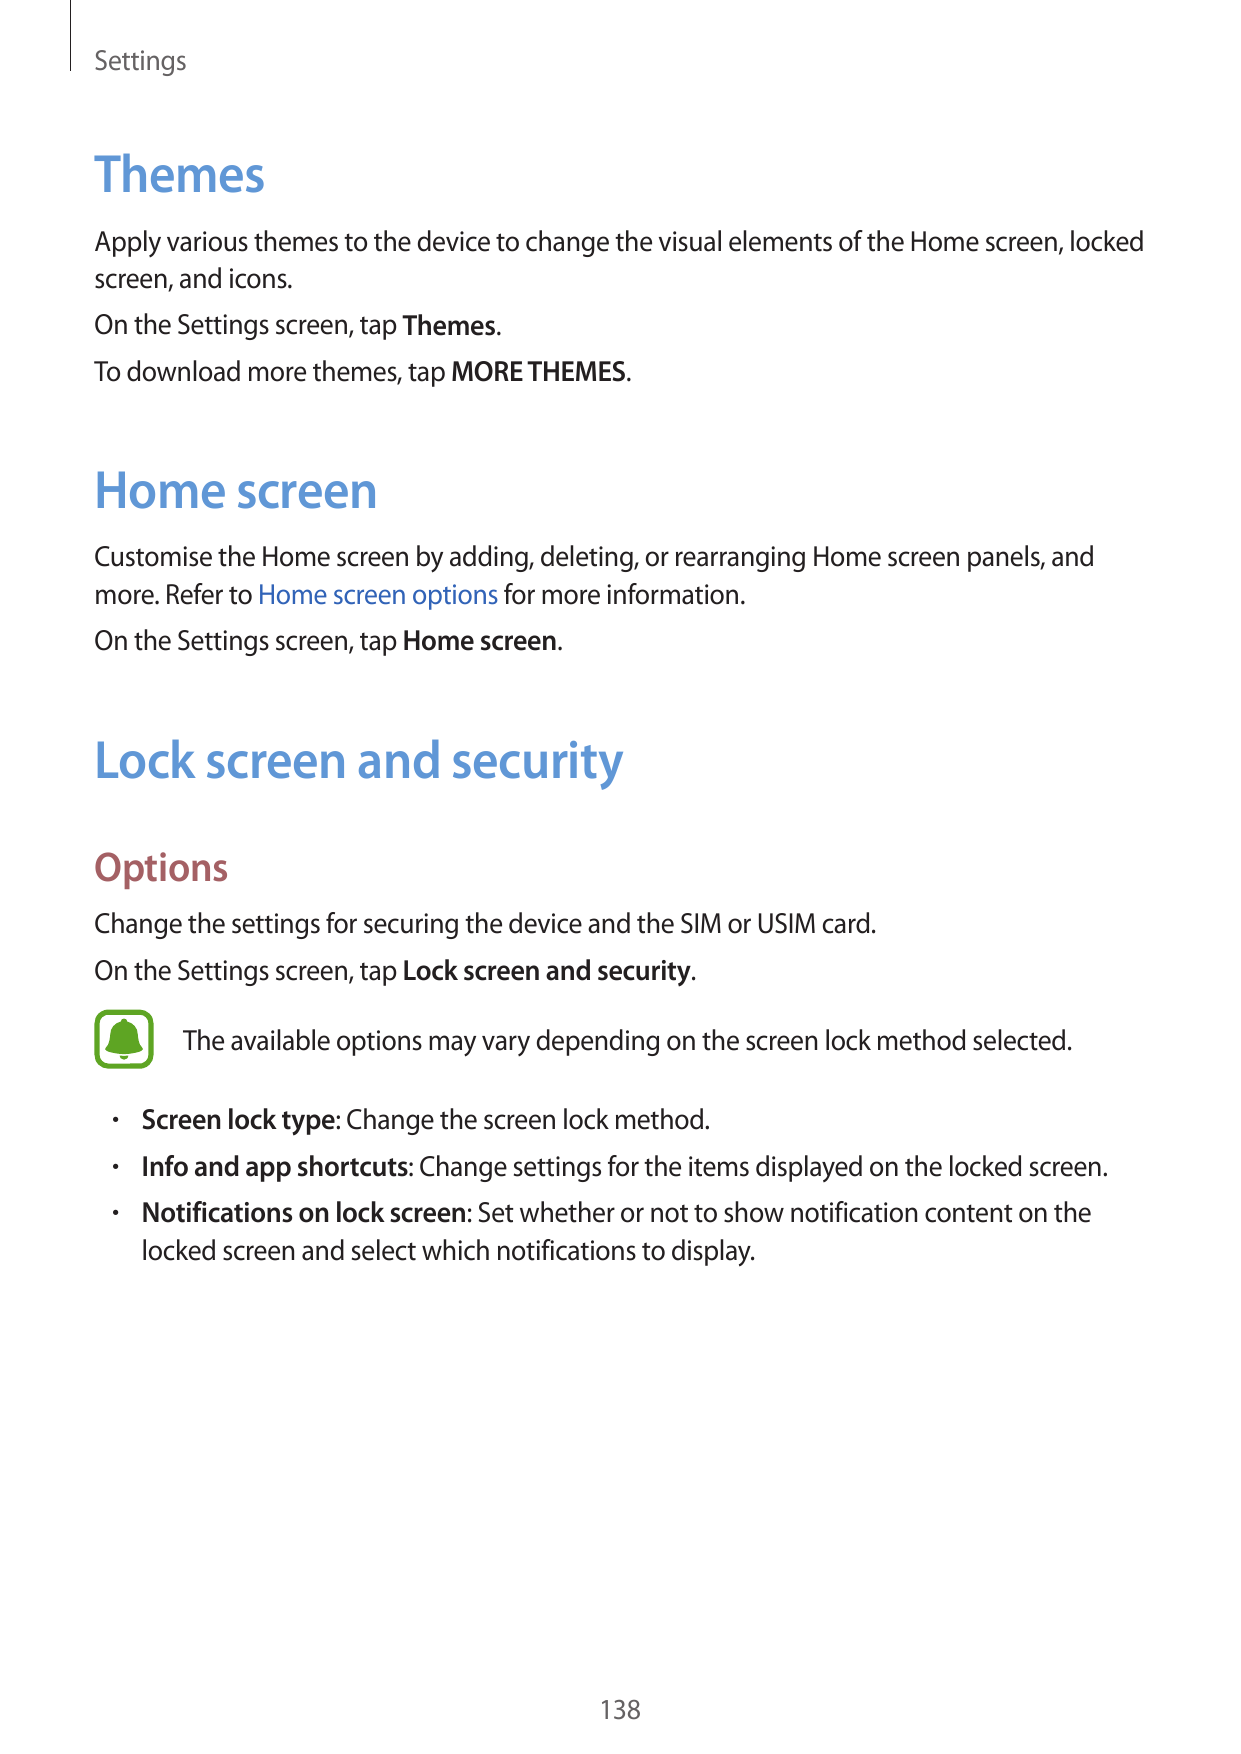 SettingsThemesApply various themes to the device to change the visual elements of the Home screen, lockedscreen, and icons.On th